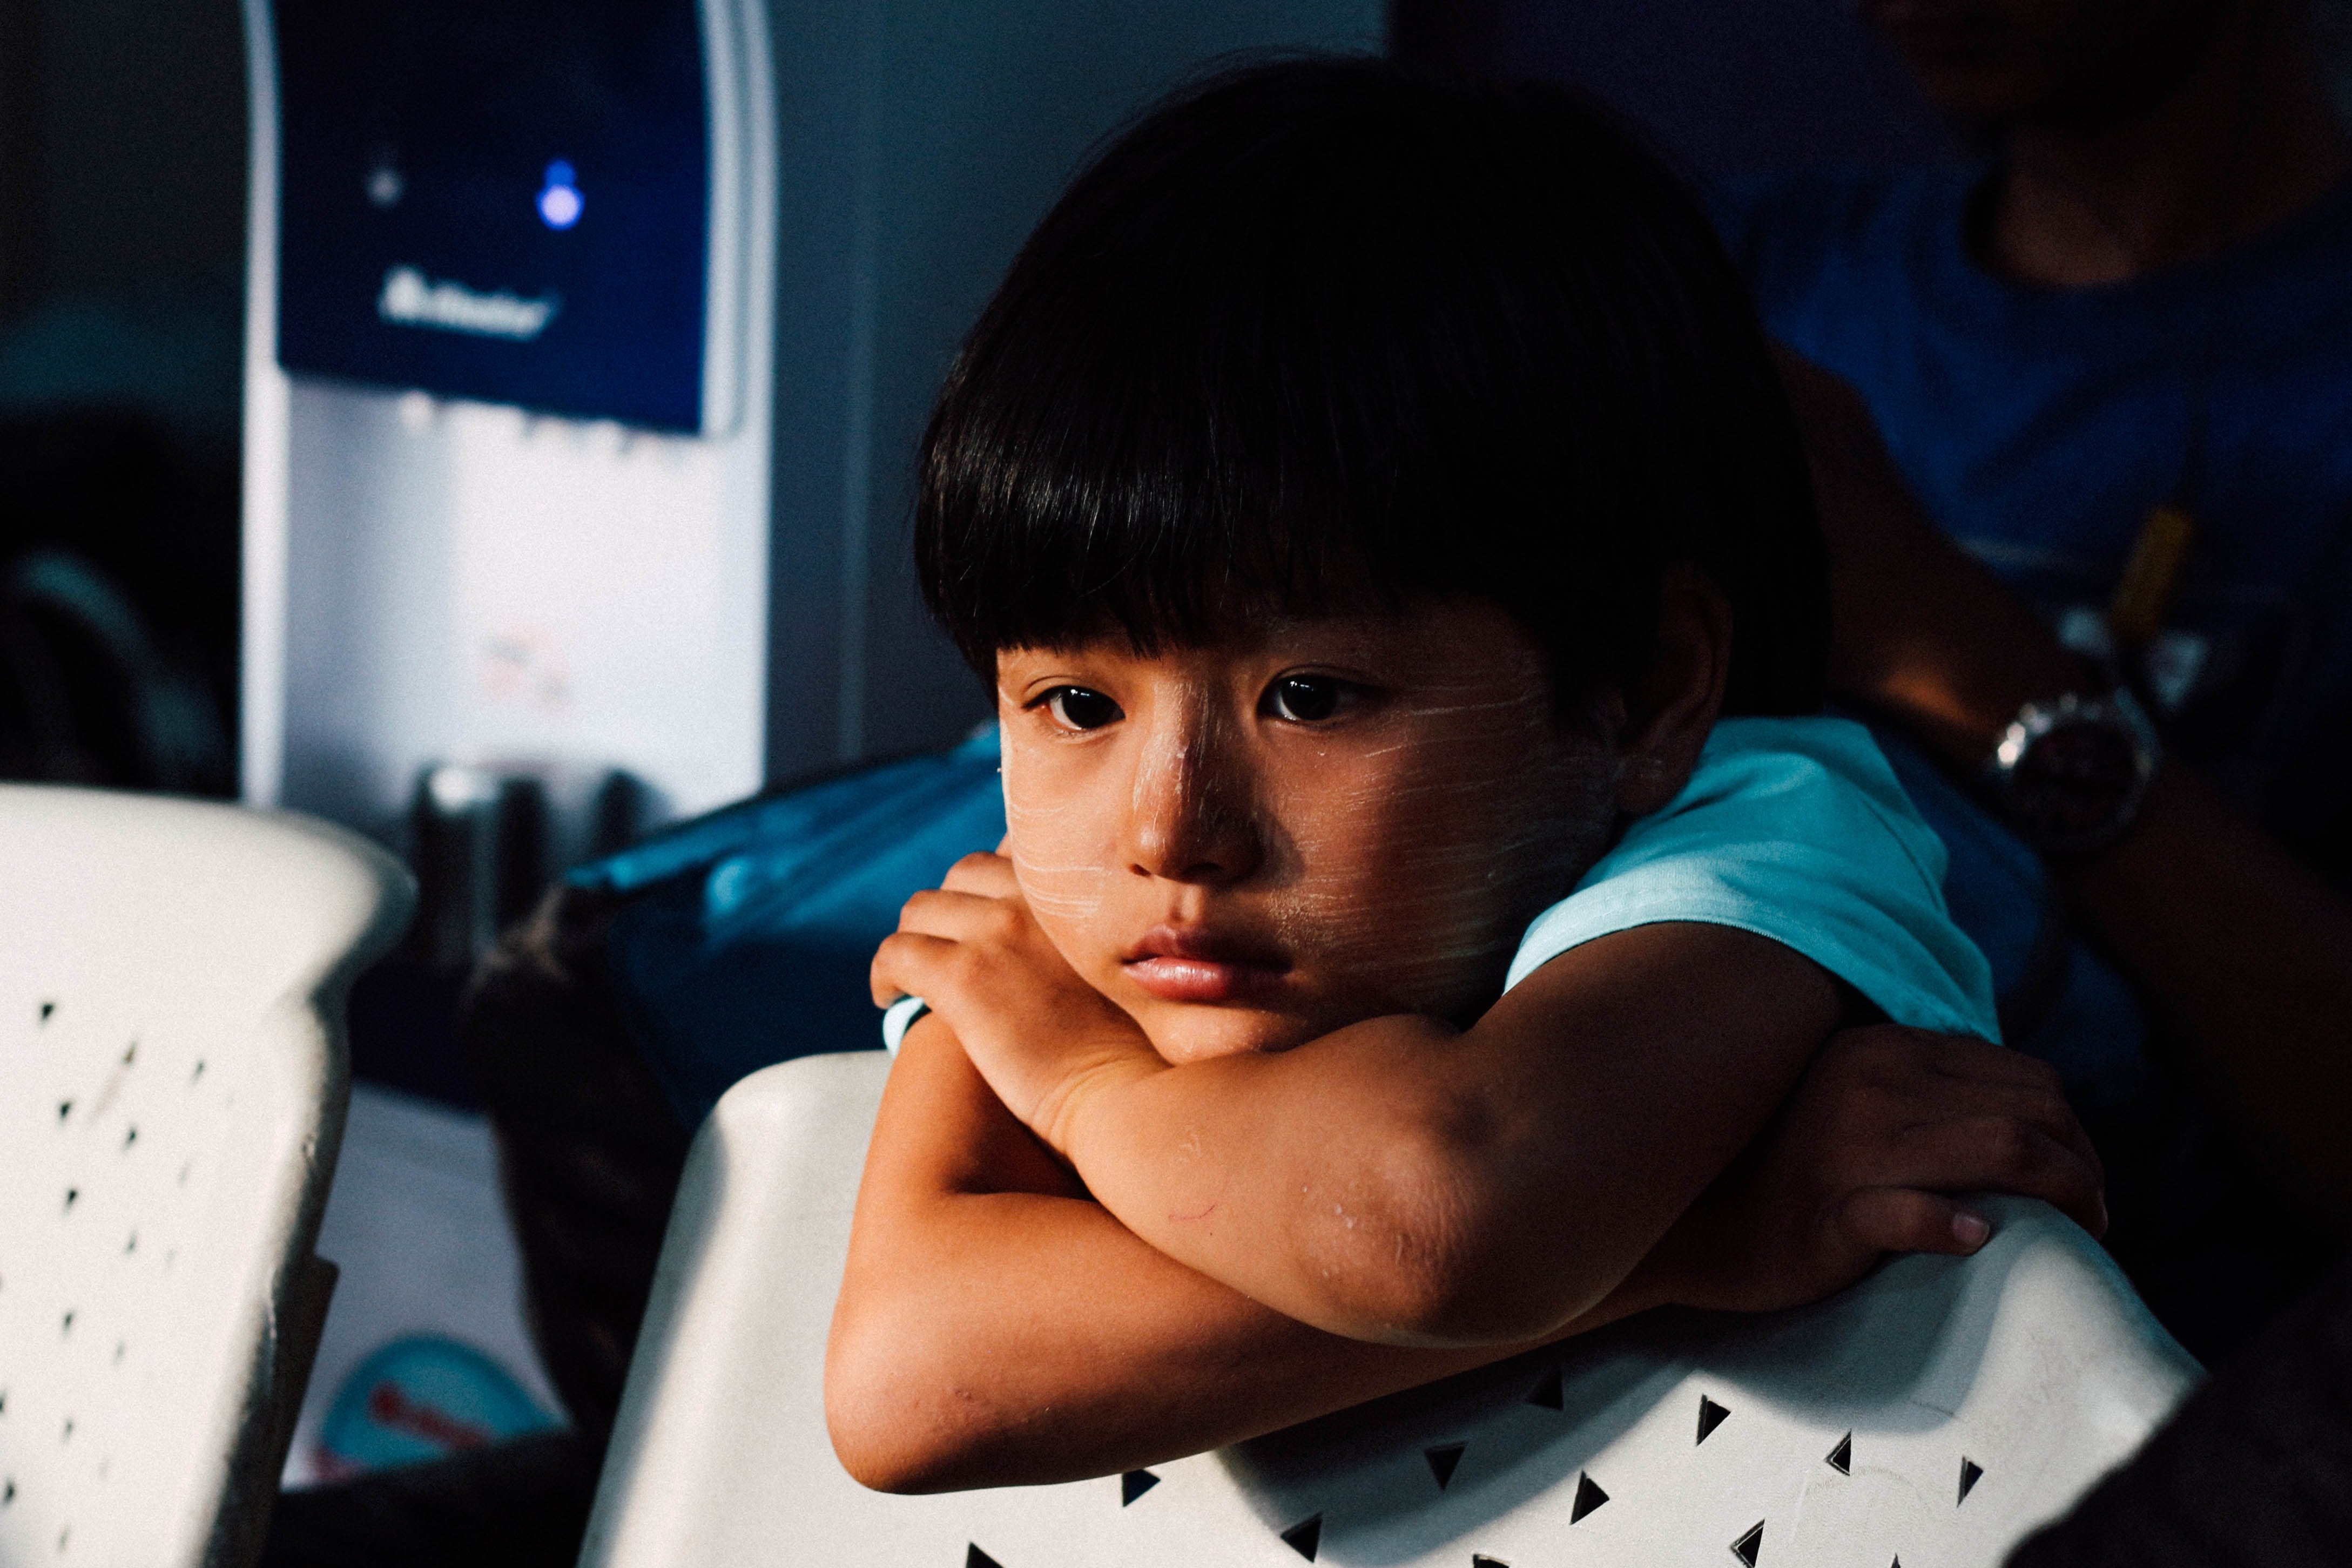 A young child feeling upset and abandoned | Photo by Chinh Le Duc on Unsplash